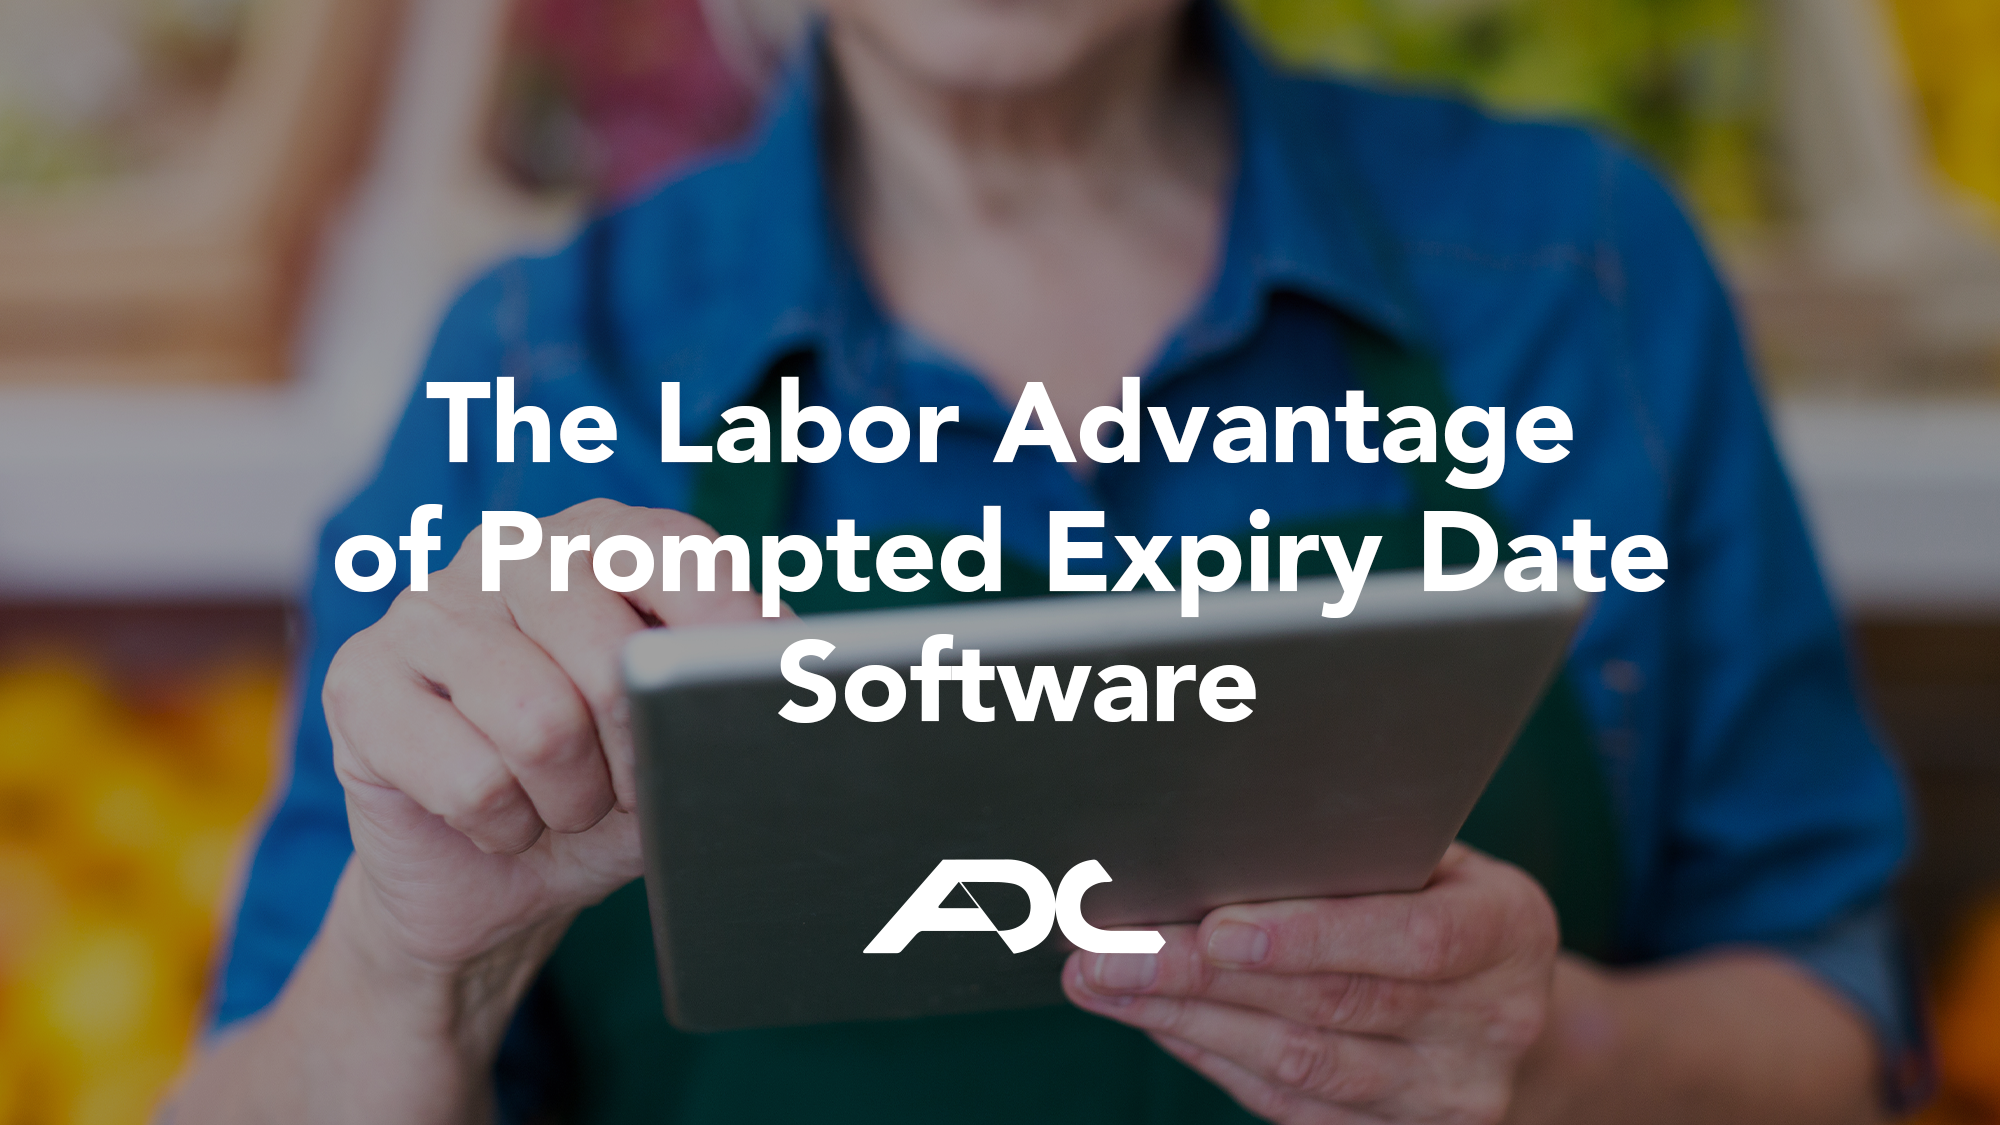 The Labor Advantage of Prompted Expiry Date Software